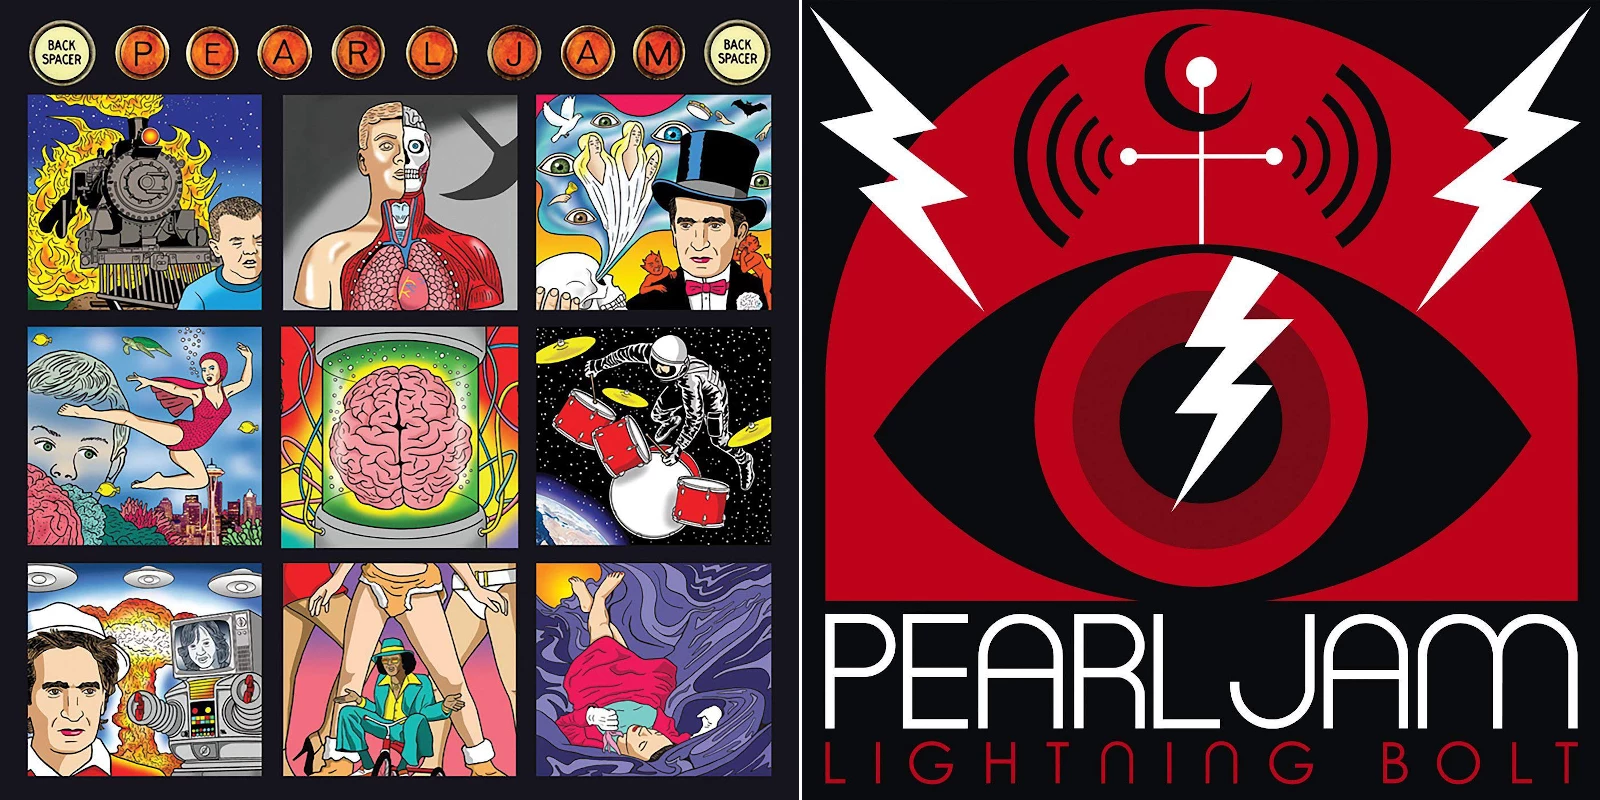 what are the popular songs by pearl jam